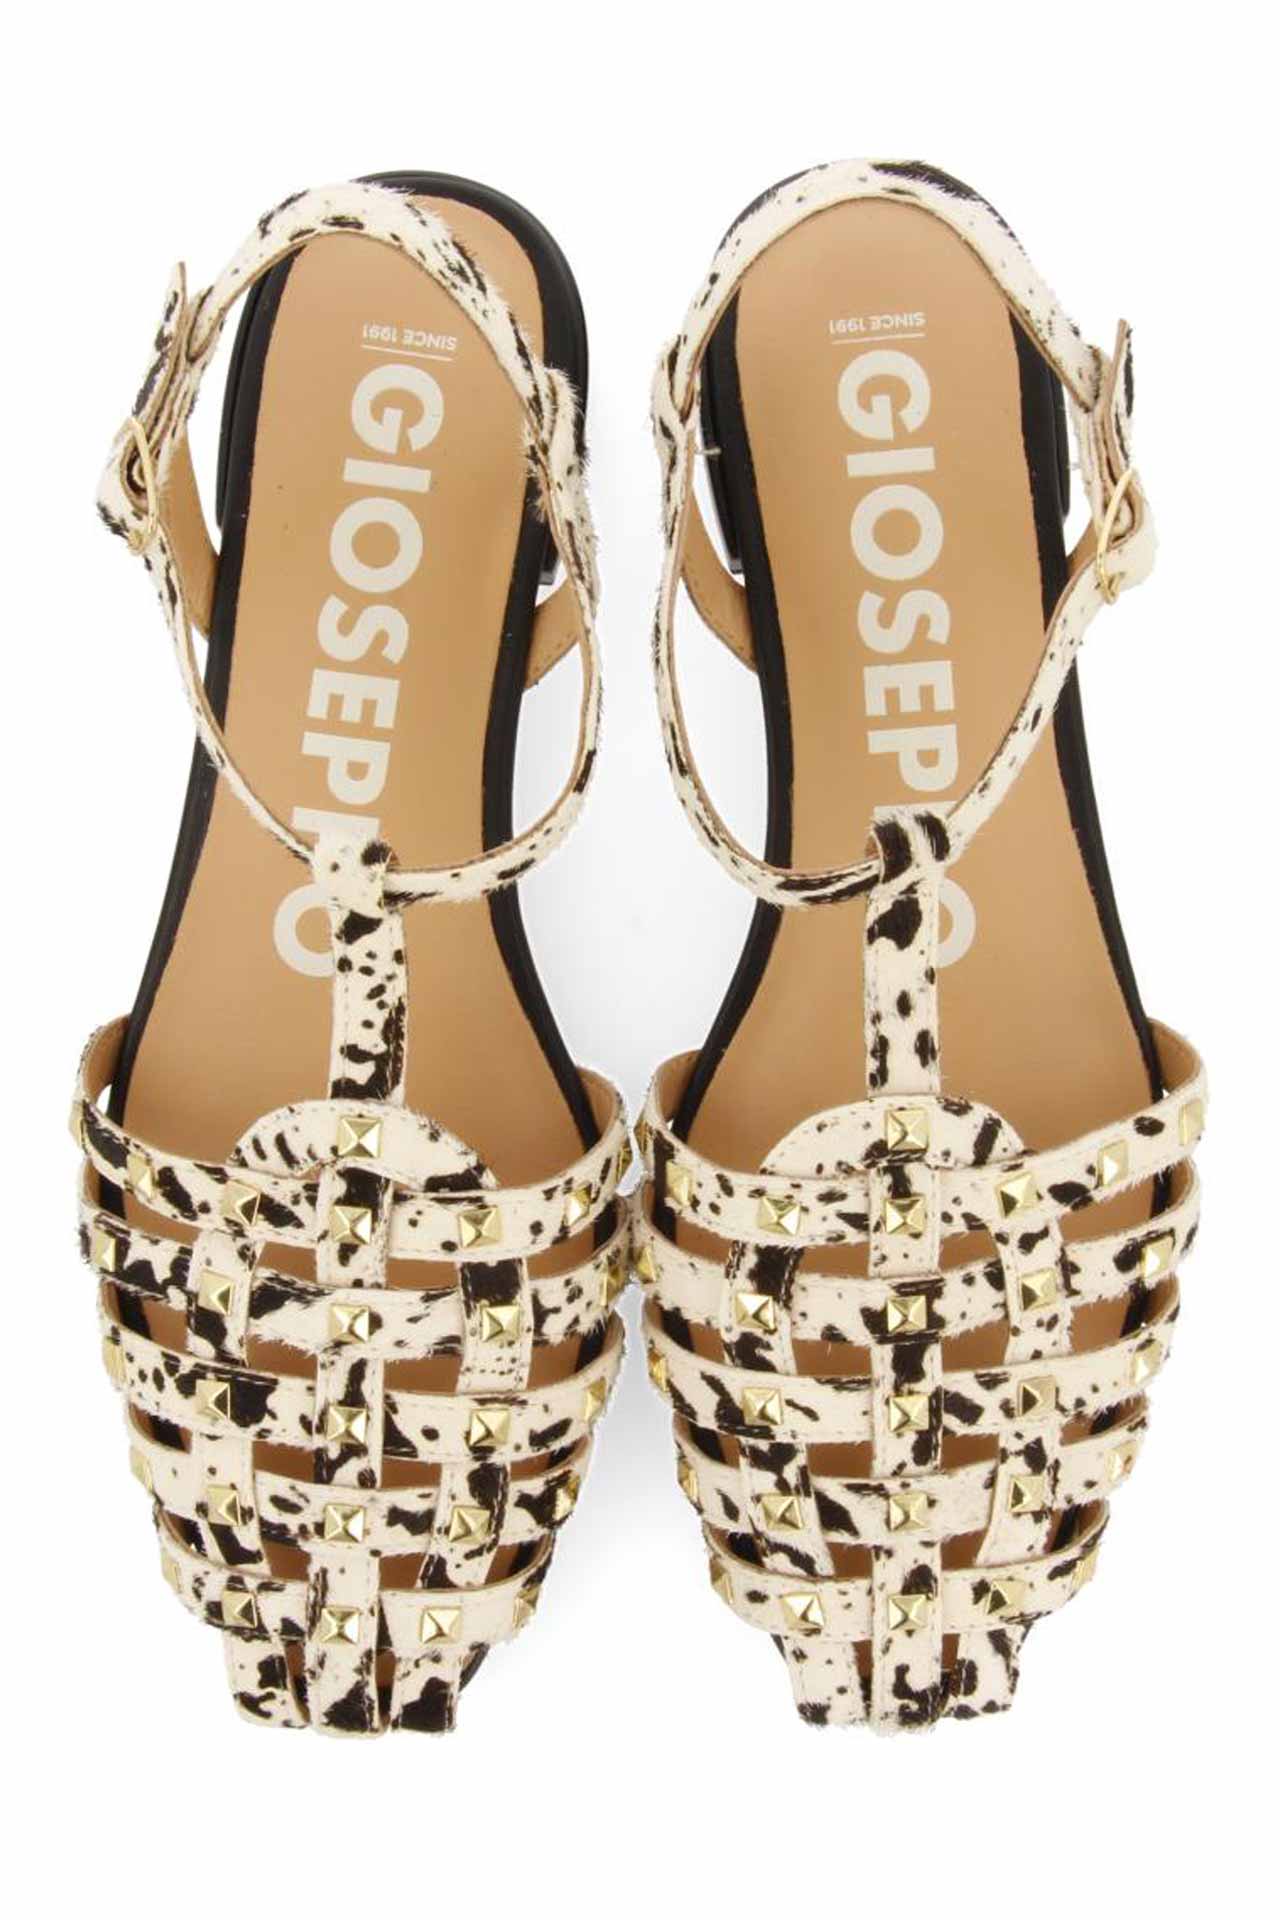 GIOSEPPO CONNERTON LEATHER CRAB-STYLE SANDALS WITH ANIMAL PRINT AND STUDS